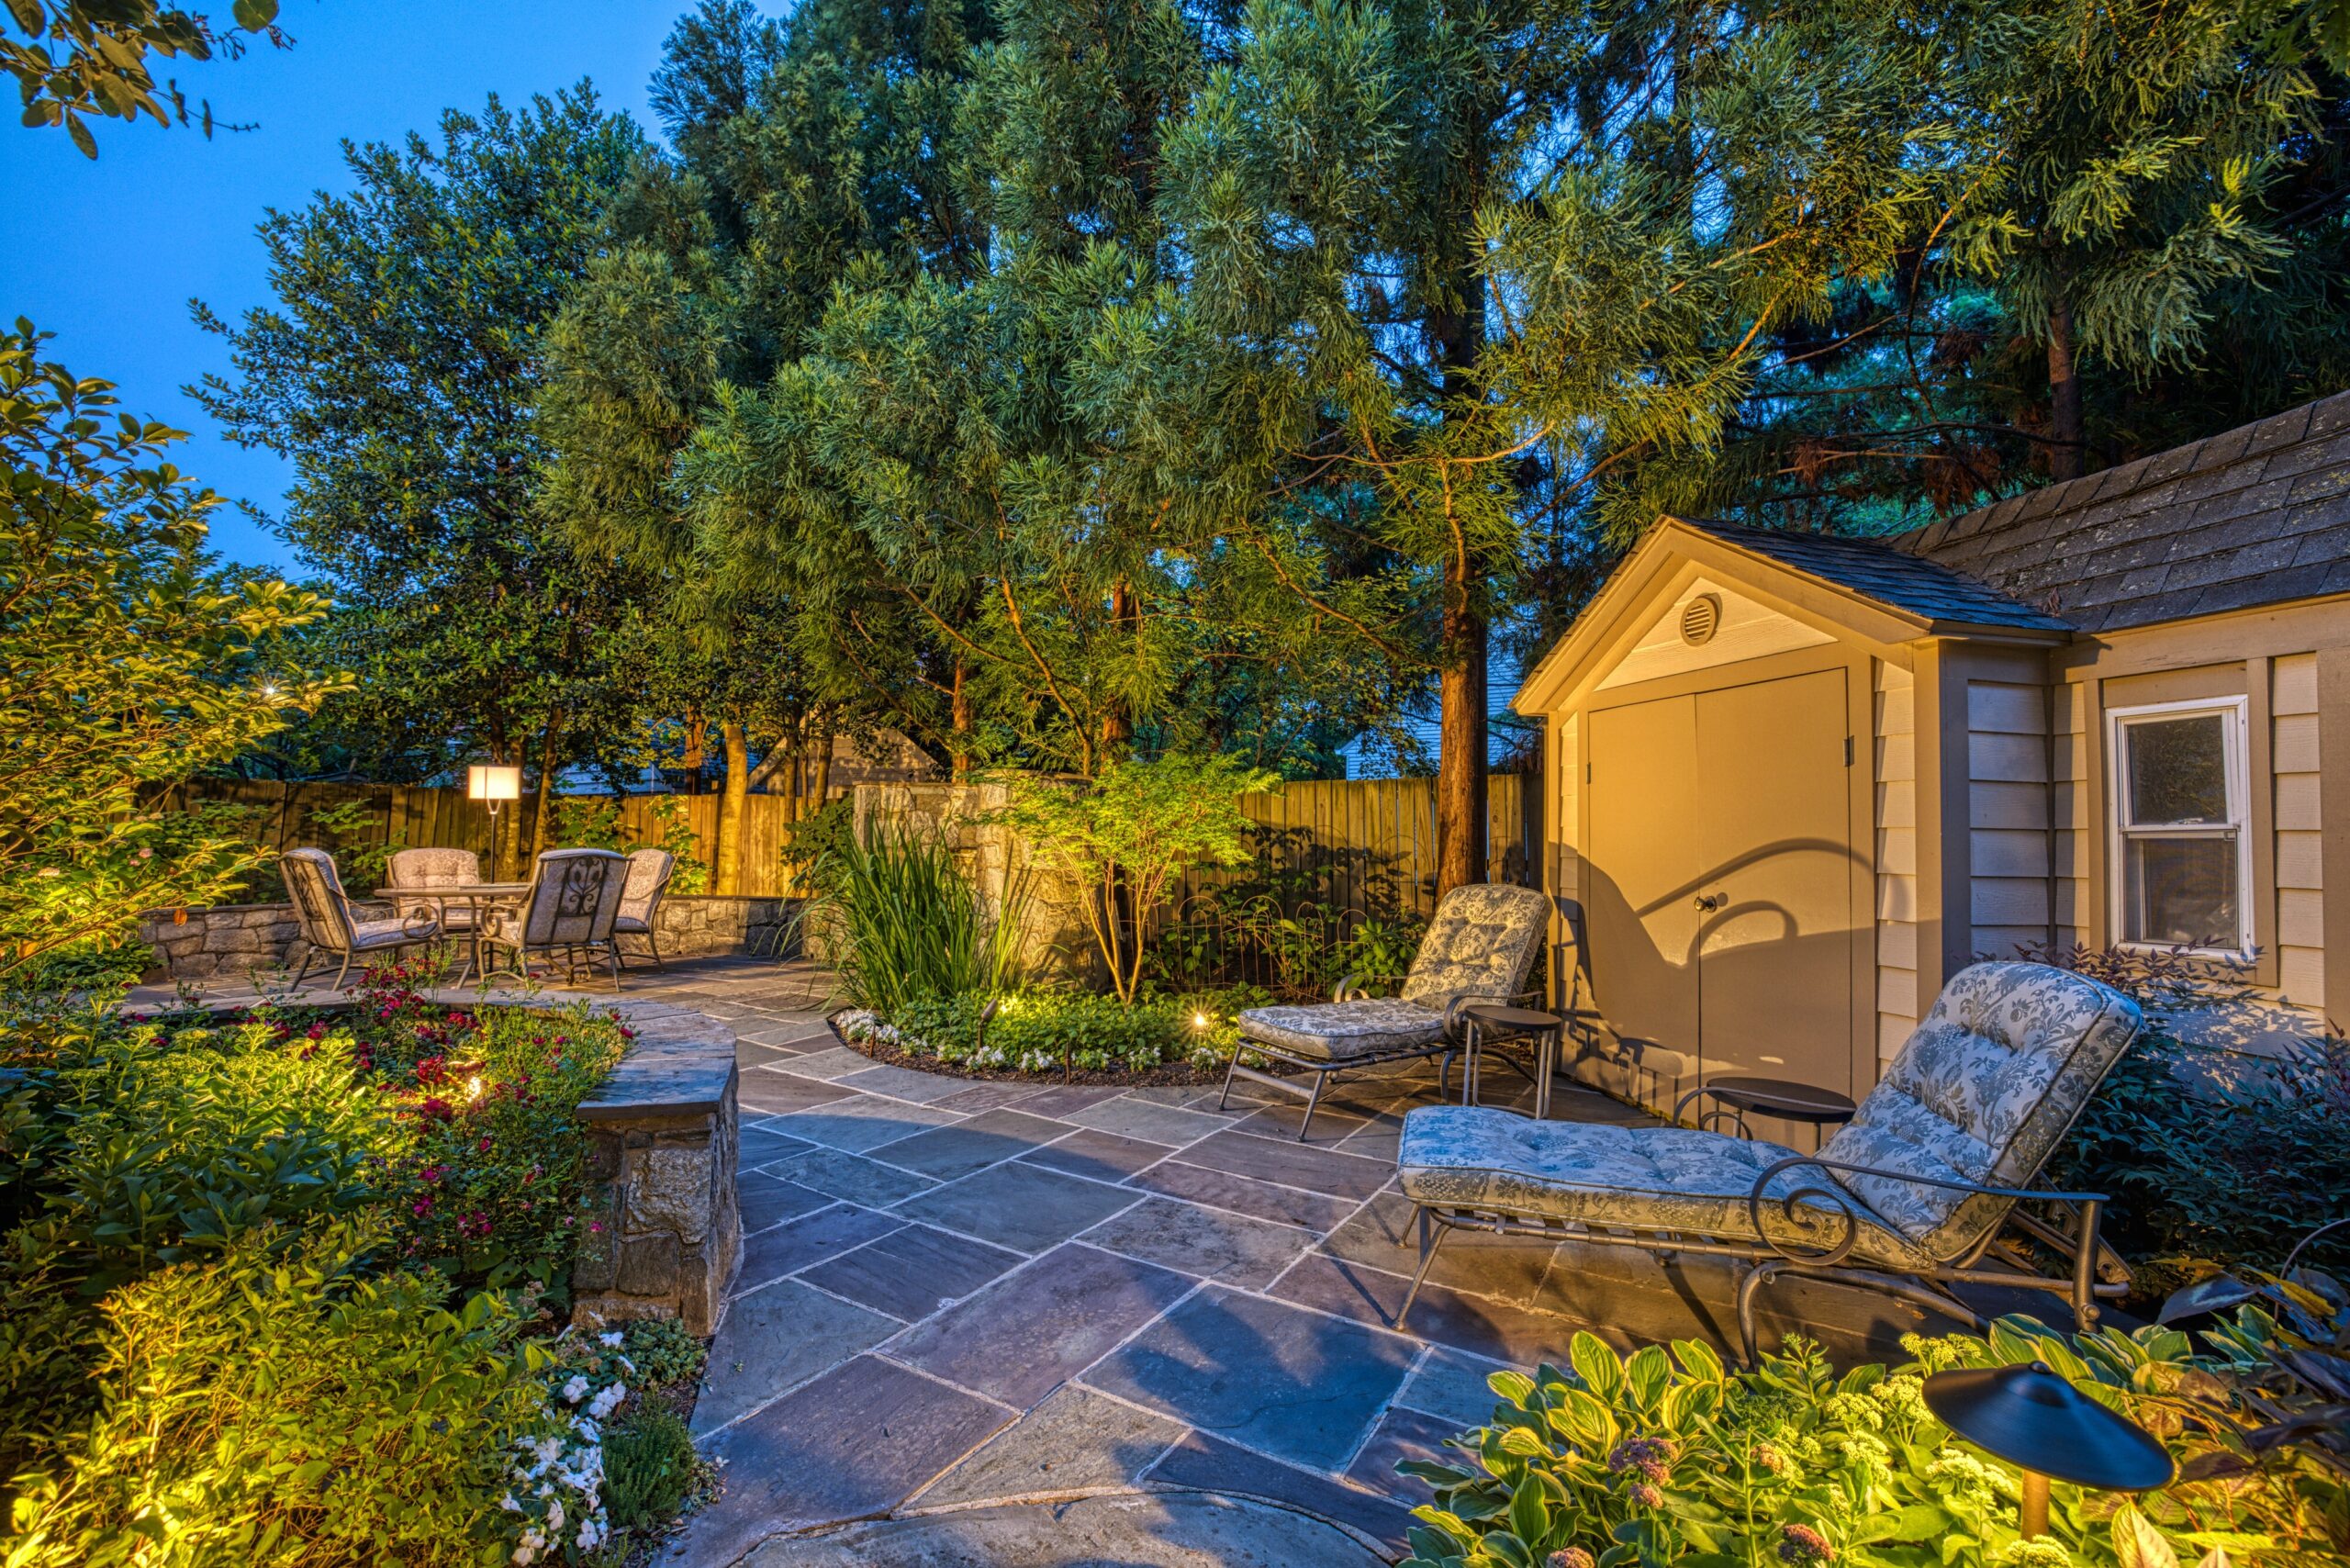 Professional exterior photo taken at dusk of 819 N Fillmore St - Showing the rear of the home looking along the flagstone patio